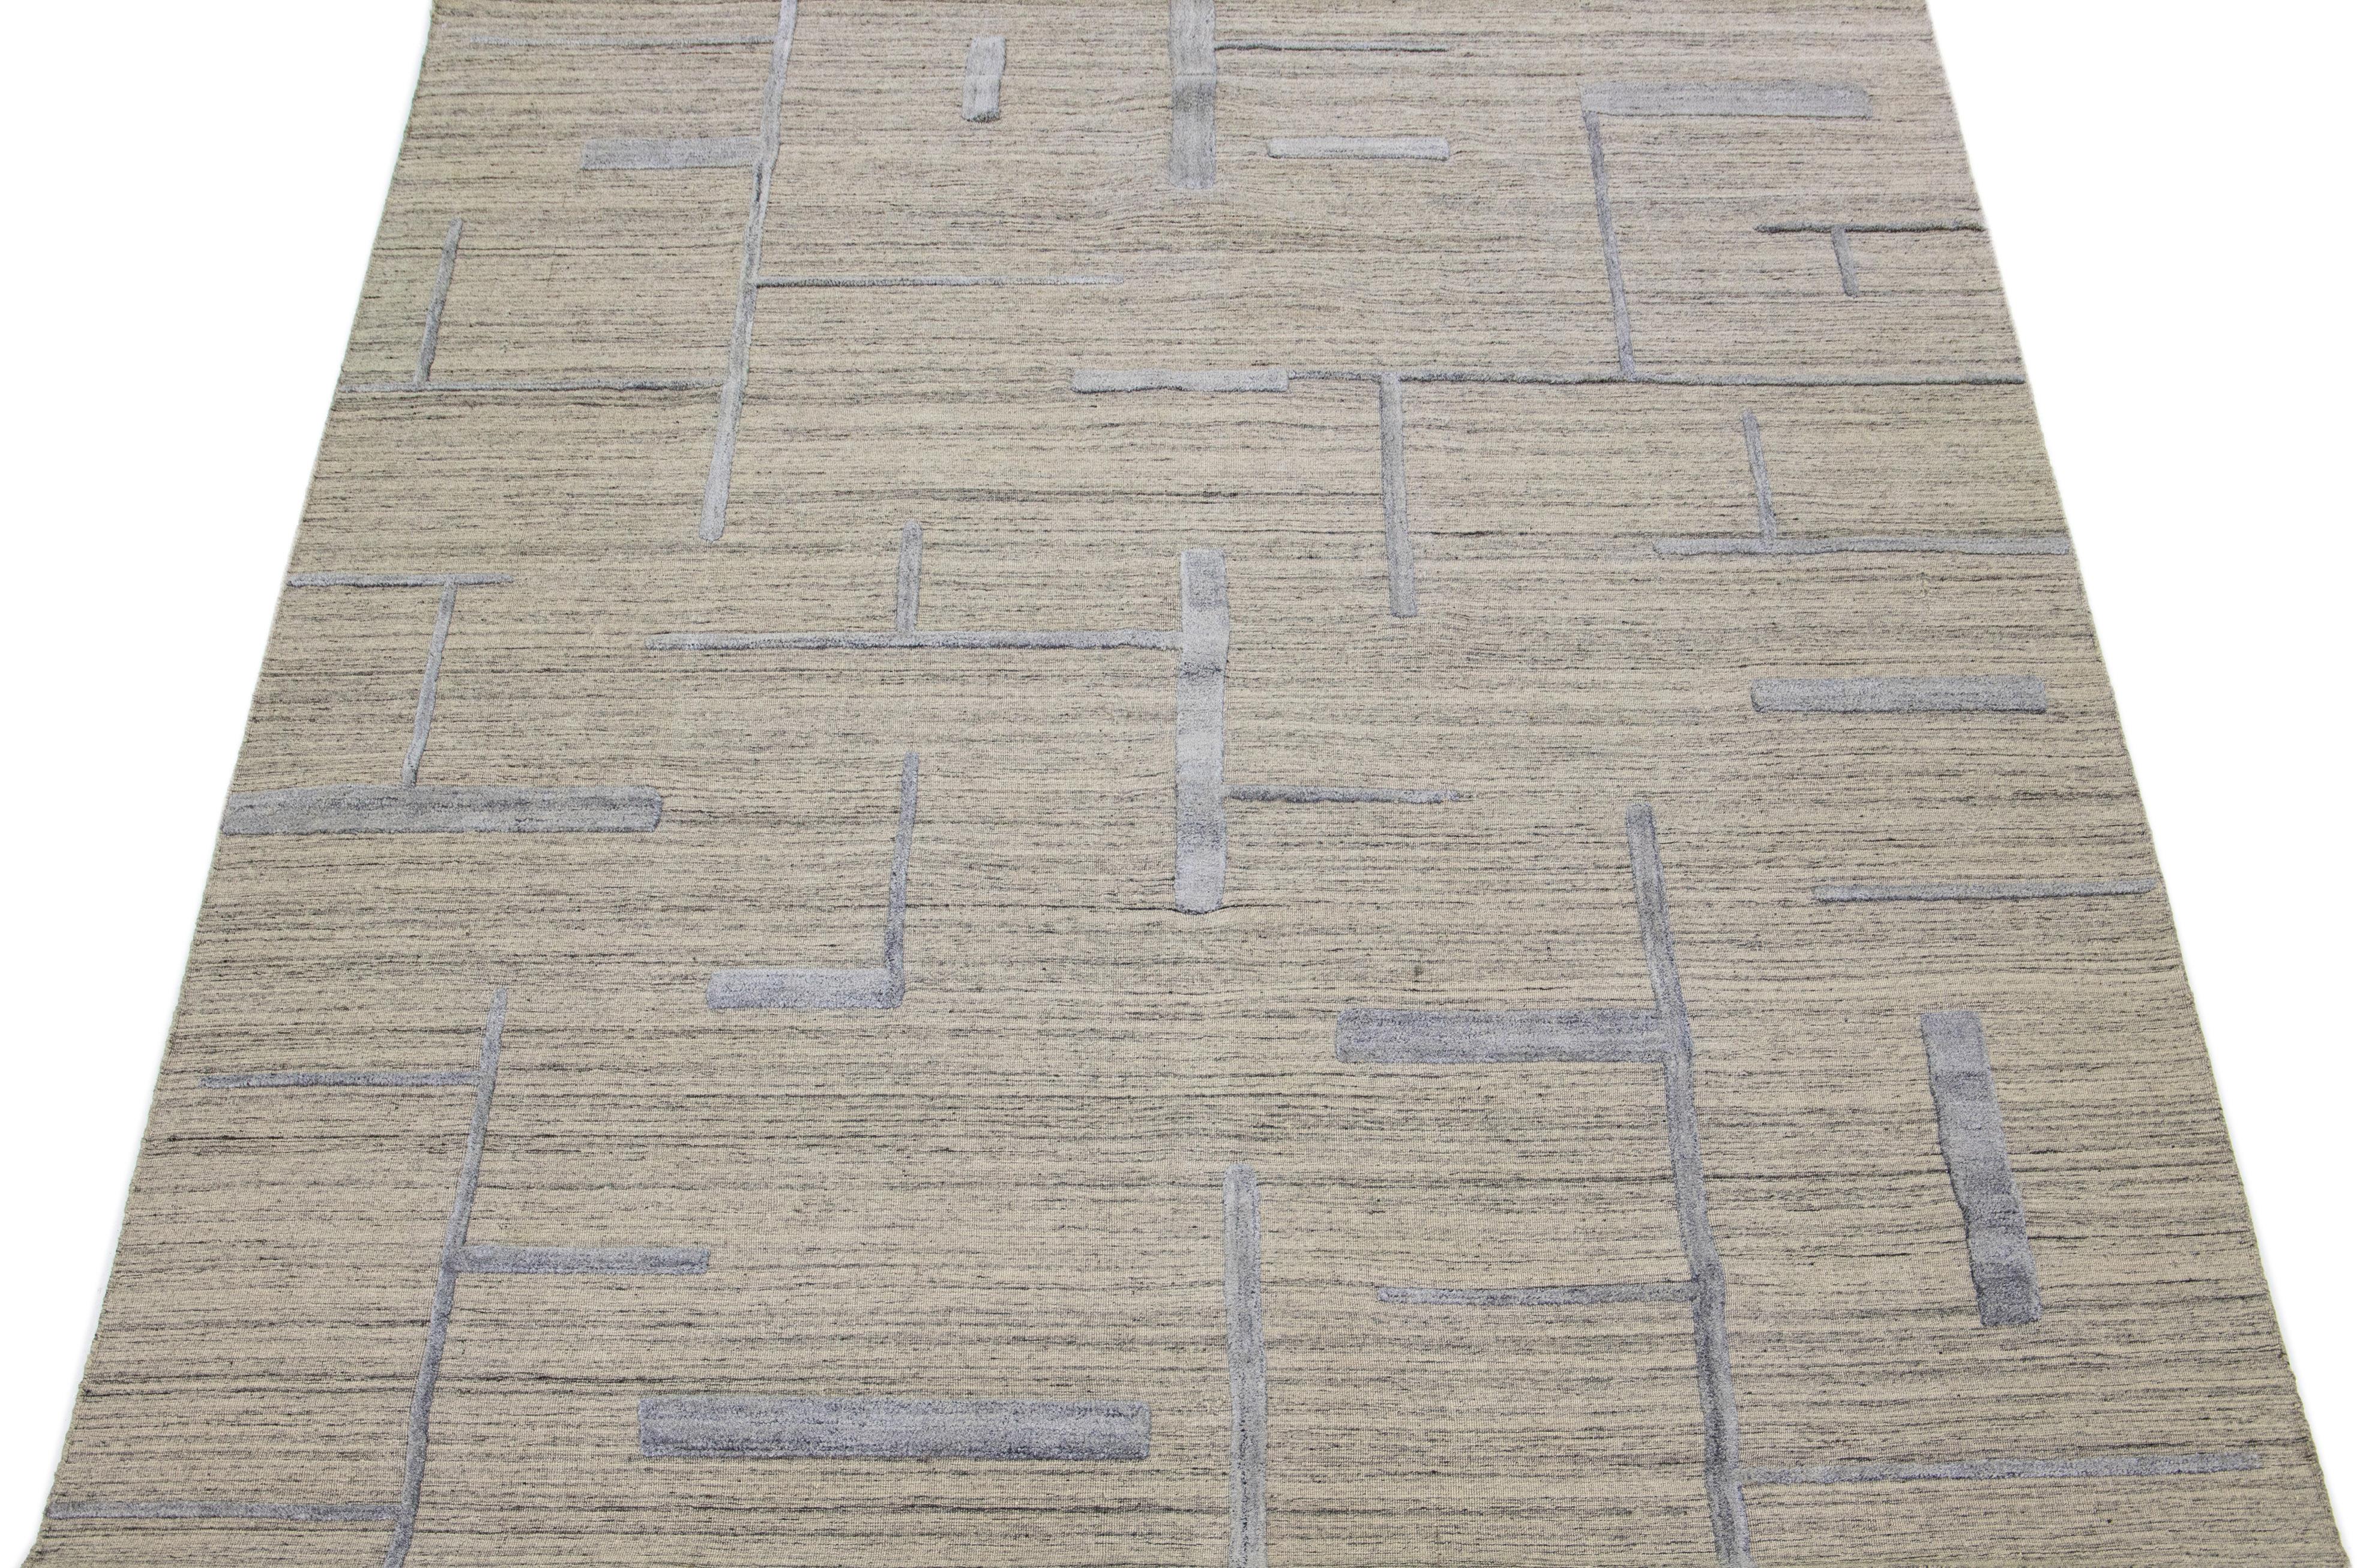 Beautiful Contemporary Thom Filicia Home Collection rugs. This Indian hand-woven rug is made of wool & viscose and has a beige color field with gray accents all over the design. 
Thom Filicia´s eye for exquisite detailing and beautiful texture